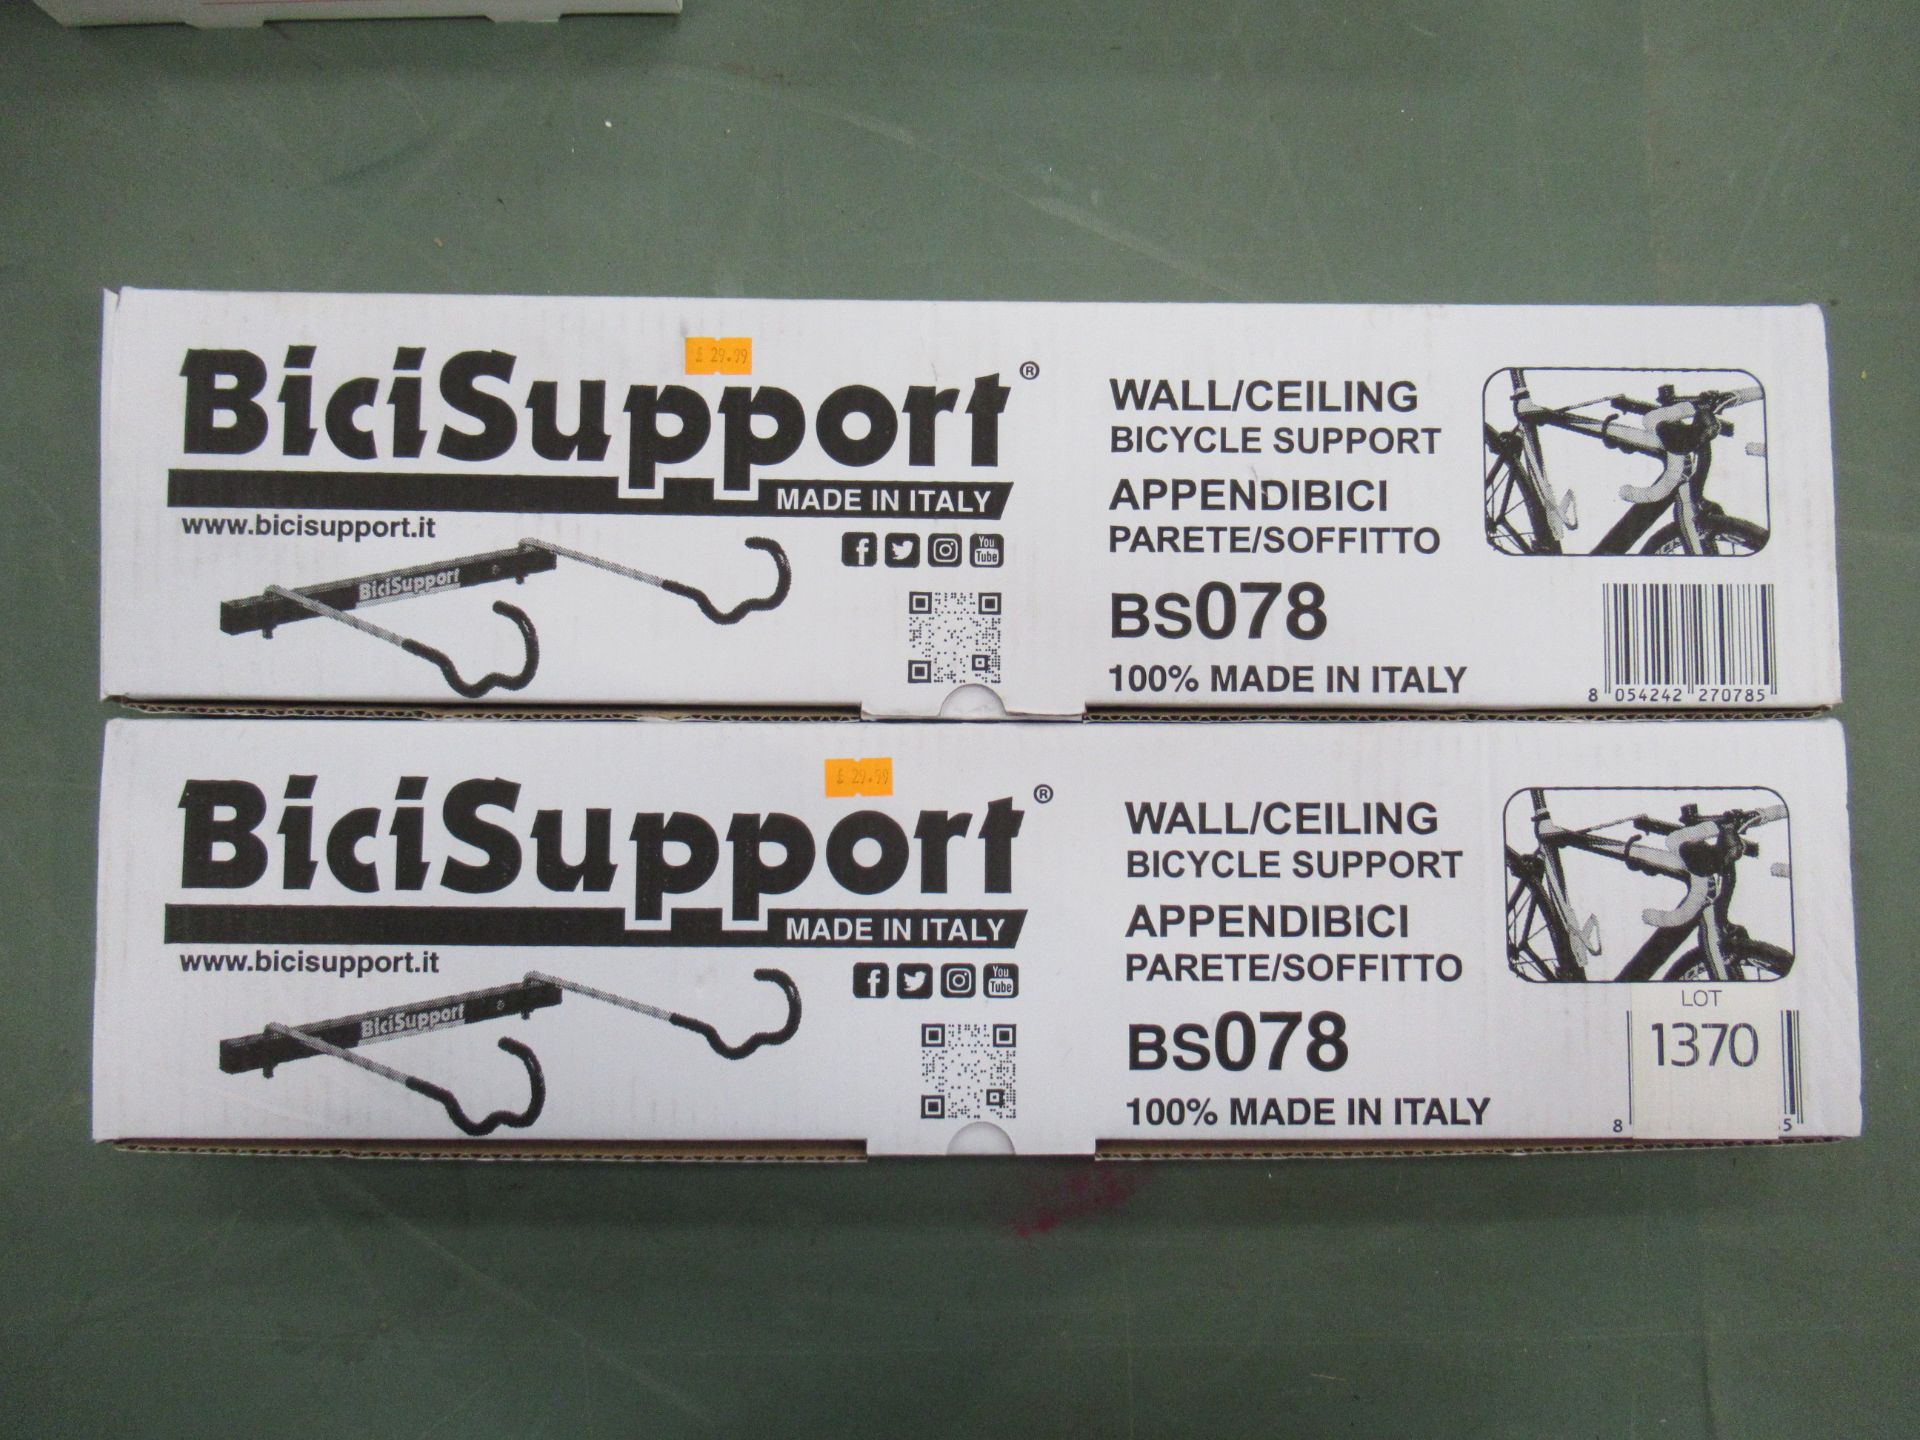 ETC TowBuddy (RRP£69) and 2 x BiciSupport wall/ceiling bicycle supports (RRP£29.99 each) - Image 4 of 4